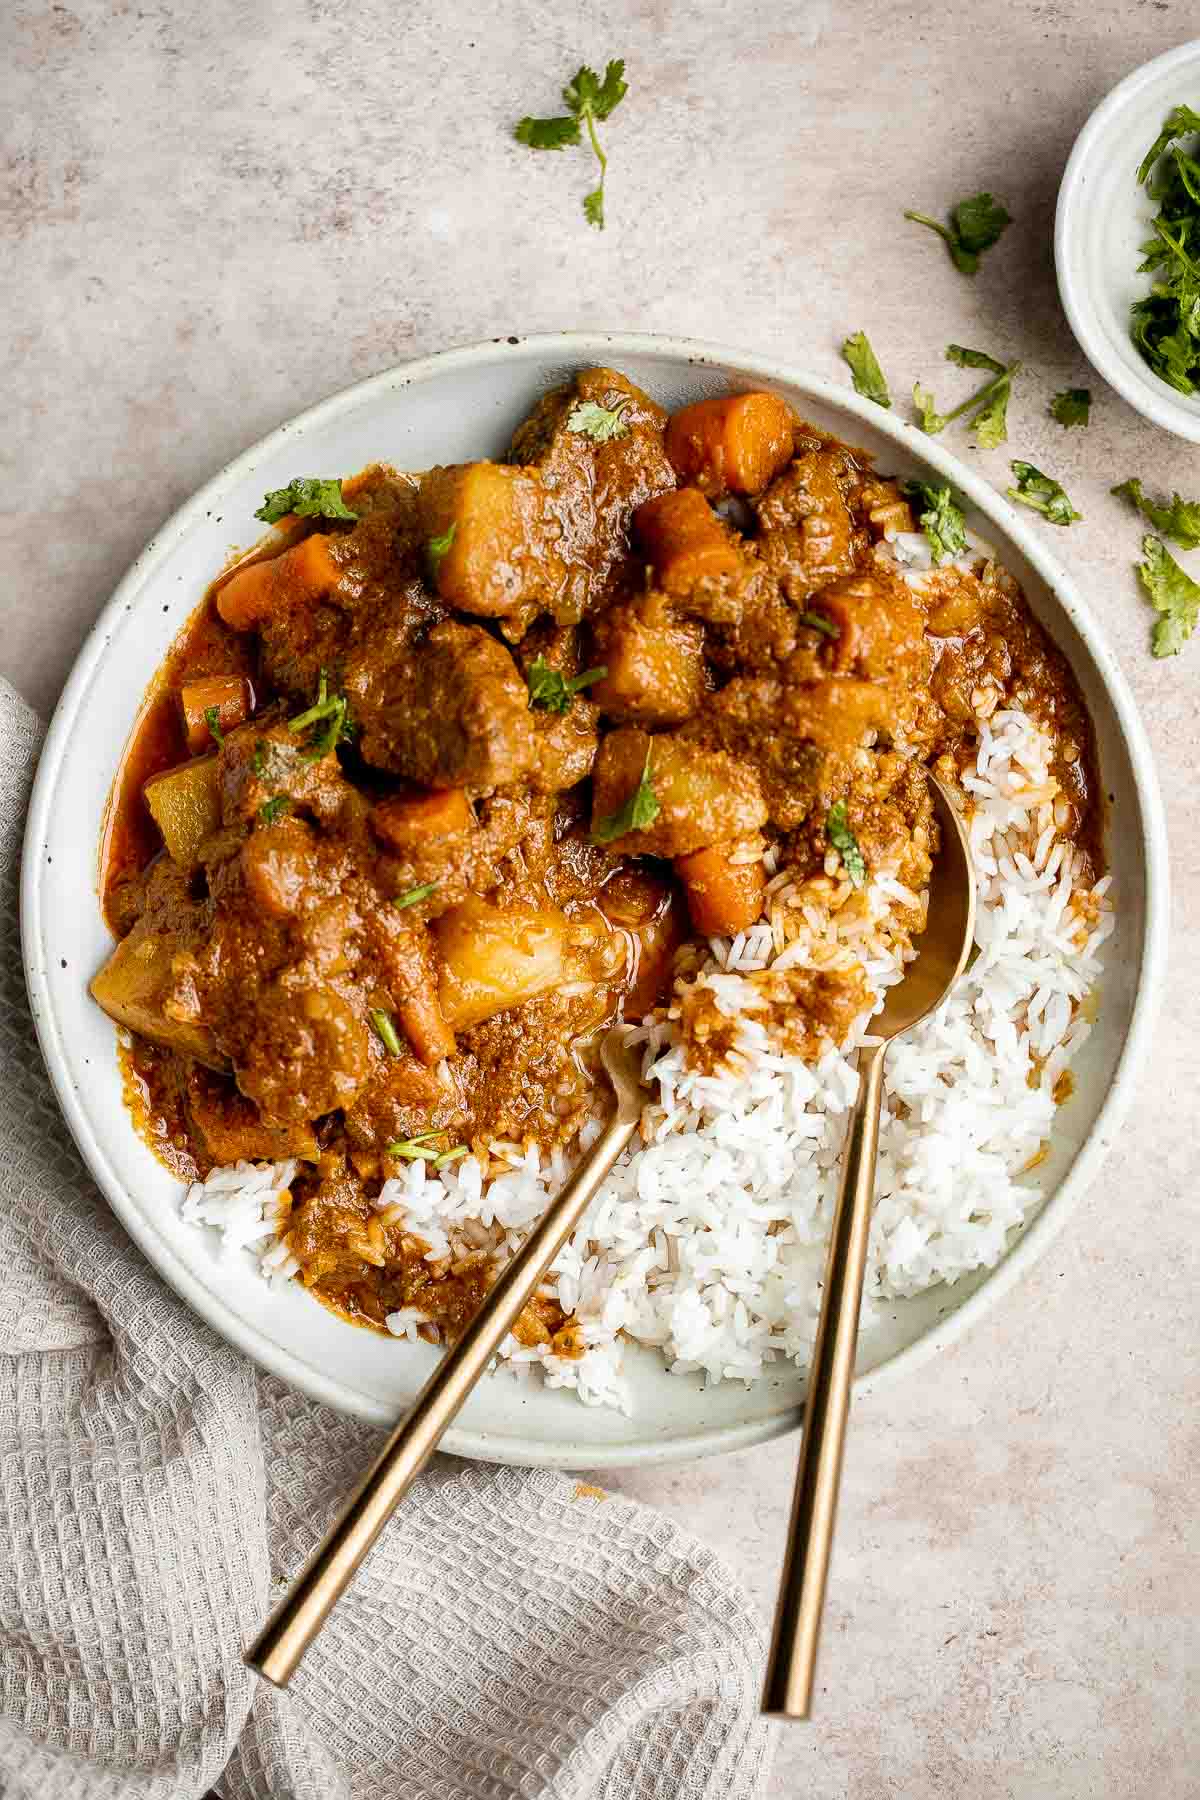 Instant pot beef curry with potatoes and carrots is delicious, hearty, comforting, and flavorful. It's made quick and easy in the pressure cooker. | aheadofthyme.com